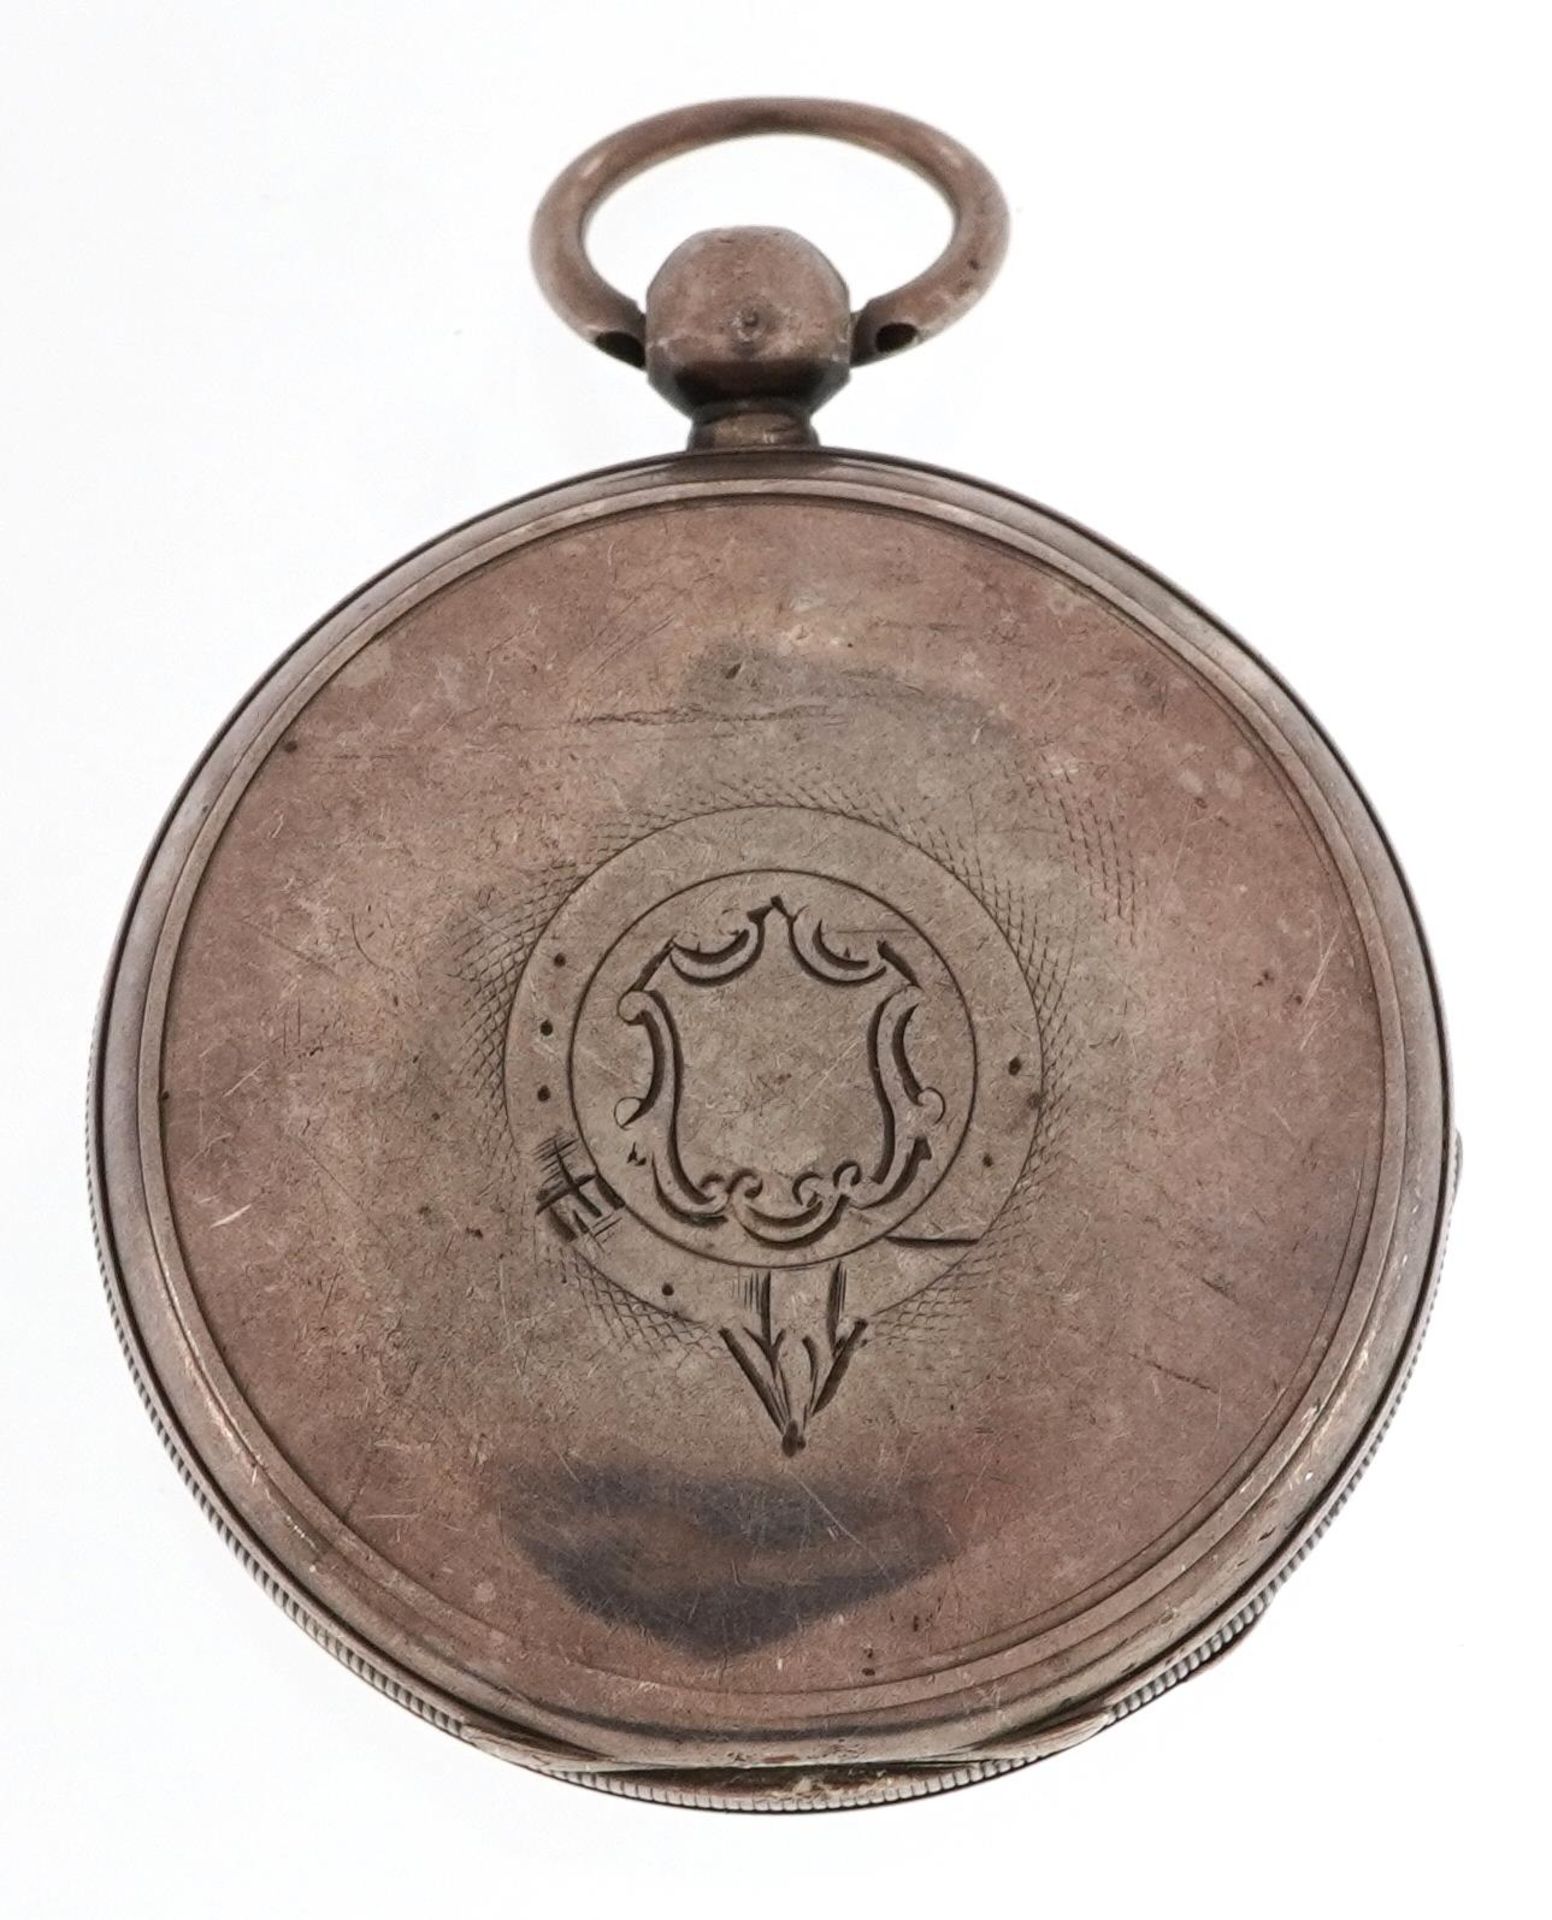 Waltham Watch Company, Victorian gentlemen's silver open face pocket watch with enamelled dial, - Image 2 of 4